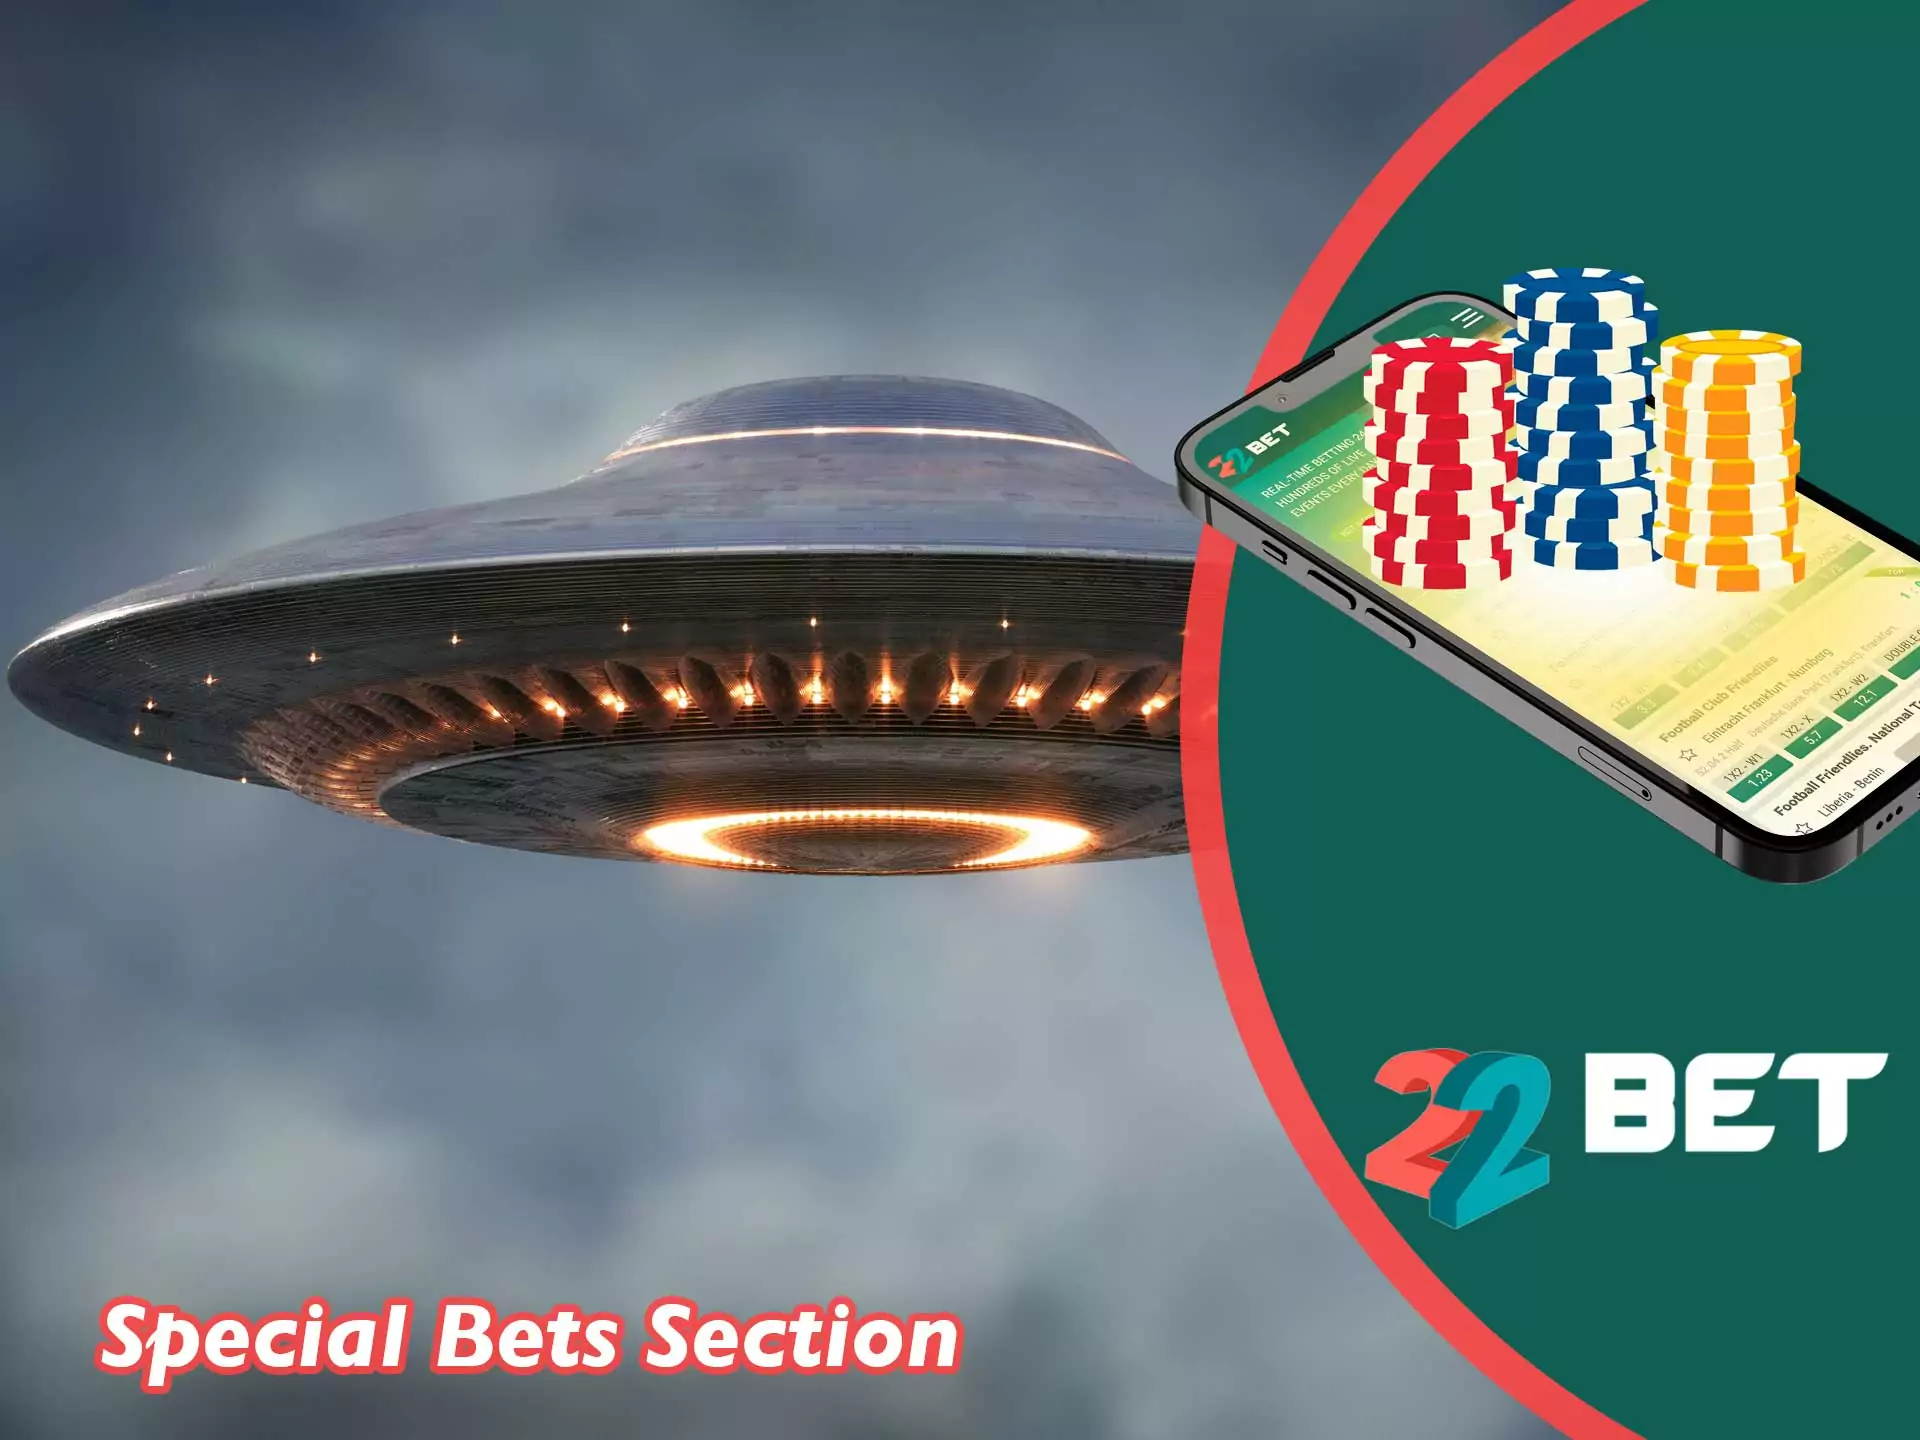 22bet has a section that is not related to sports betting.